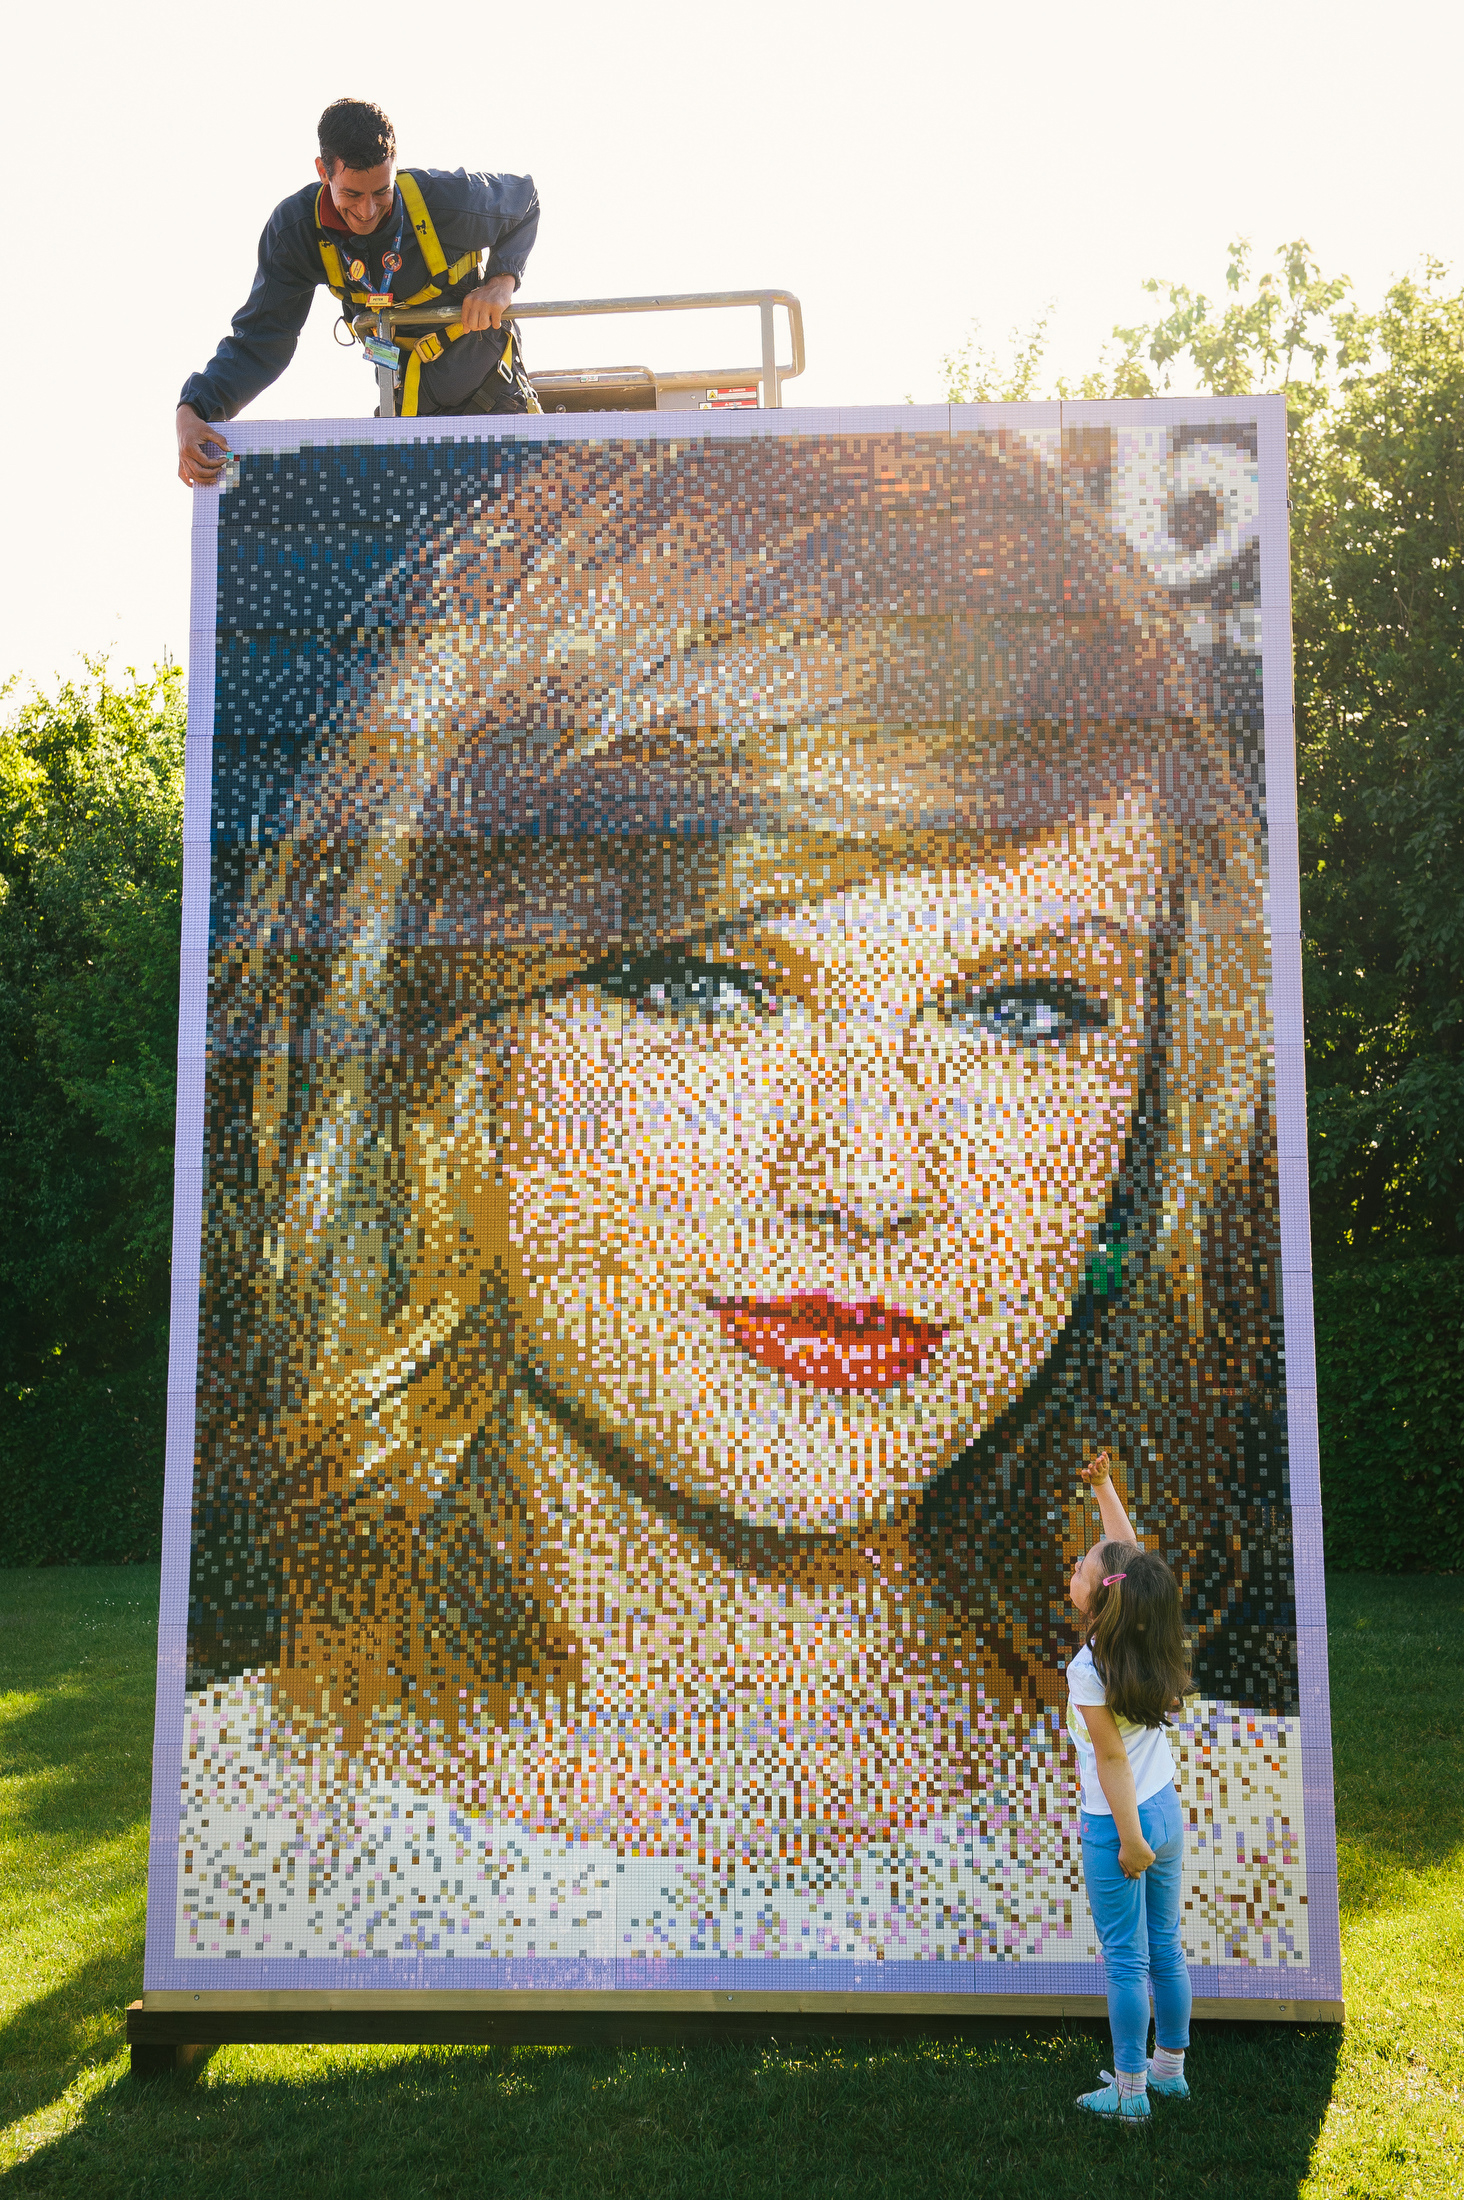 In this handout photo provided by Legoland, Kitty Baker, age 5, looks up at Legoland employee Pete Goodchild as he puts the finishing touches on the mosaic of 'Celebrity Best Friend' Taylor Swift at The Legoland Windsor Resort on May 25, 2015 in Windsor, England.